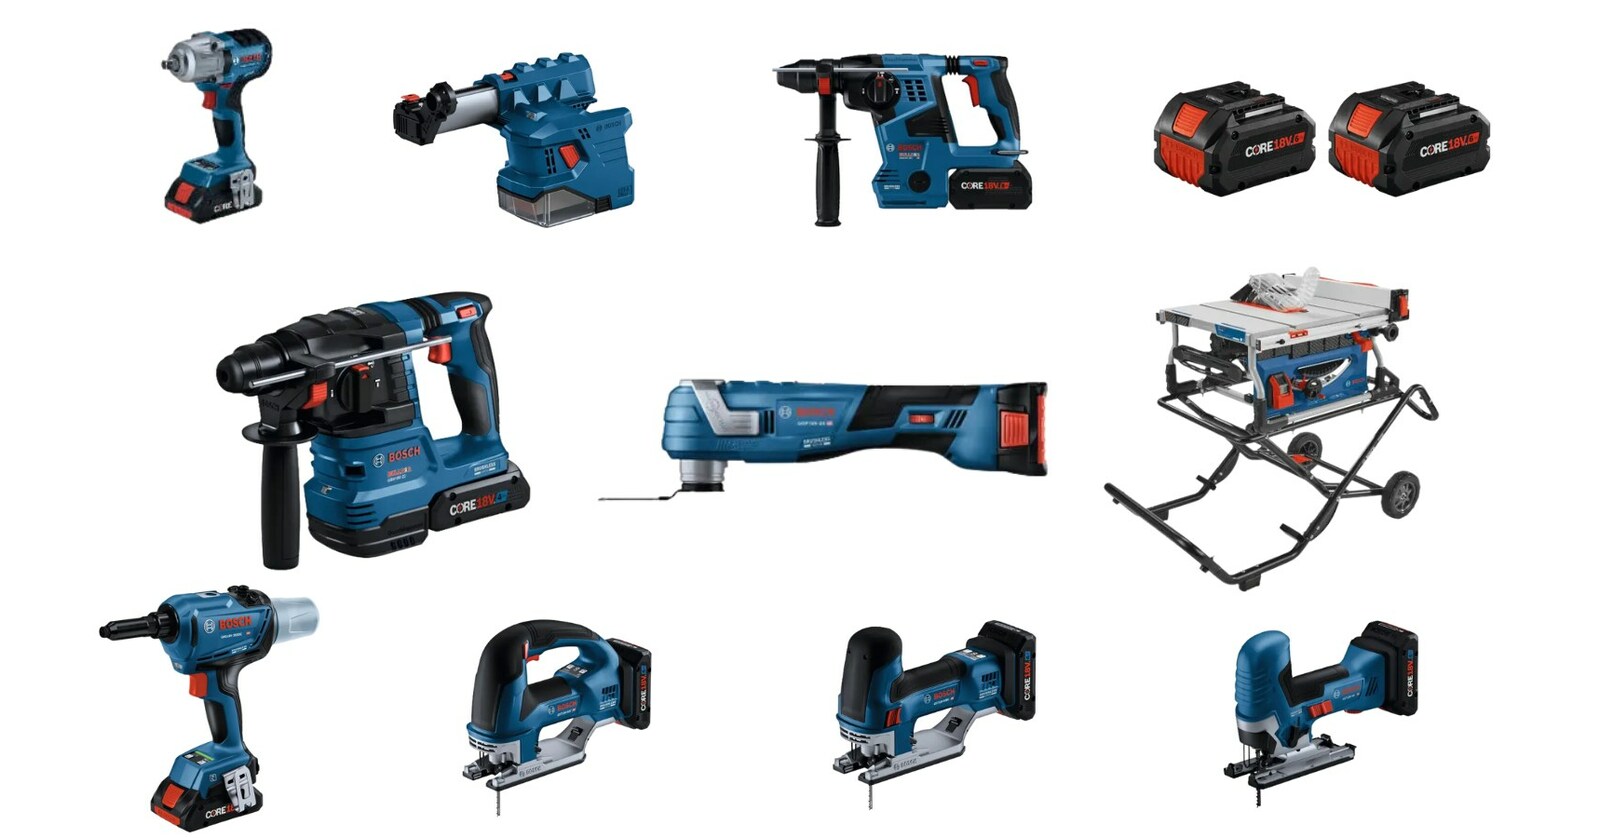 Bosch Professional Power Tools and Accessories - Why corded if you have  cordless option. Bosch Professional 18V range is here for you! Our full  range of Professional 18V Tools with Battery System